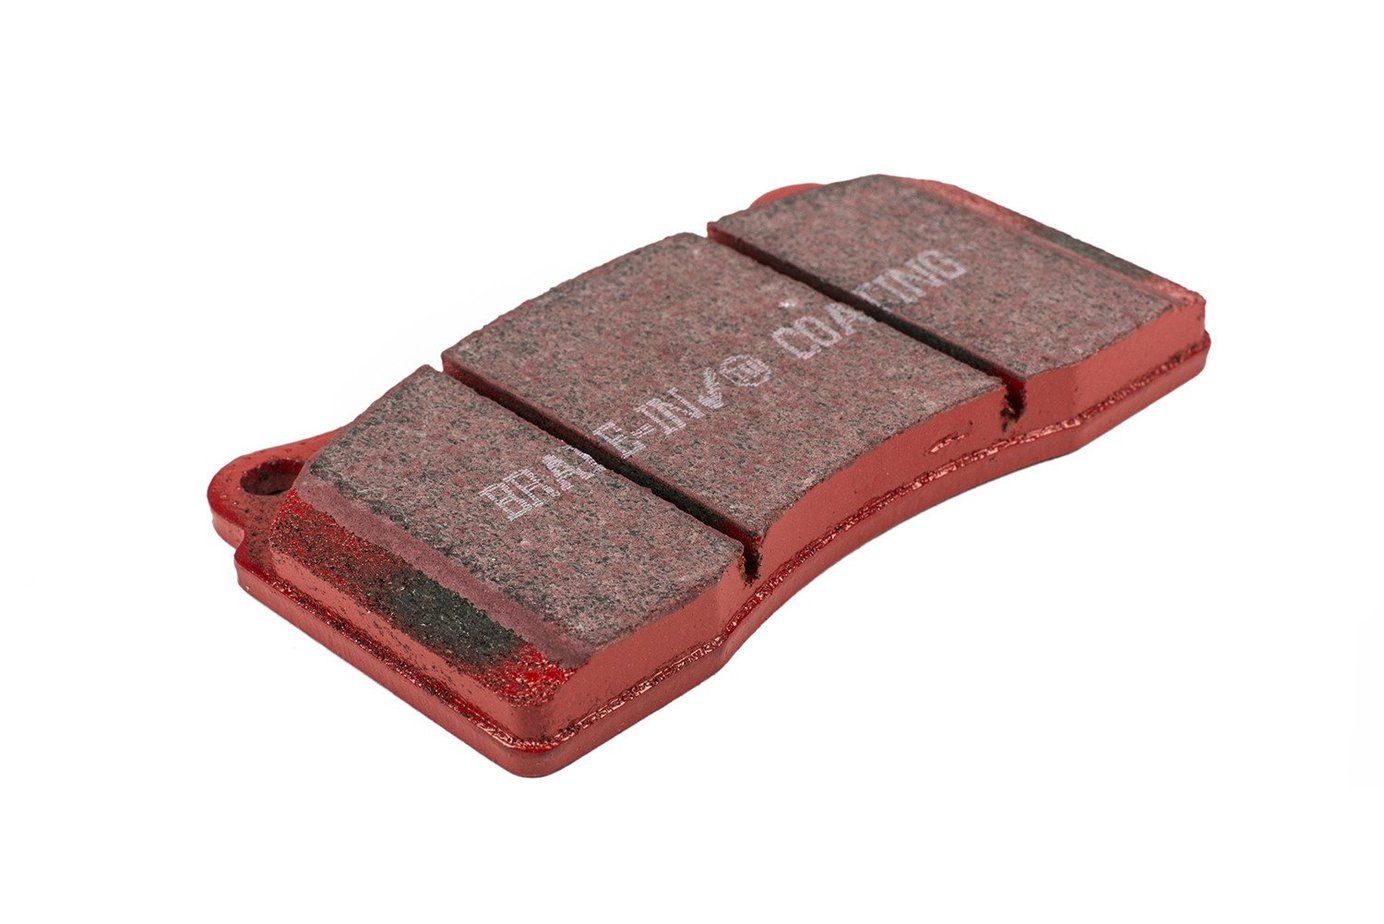 EBC Red Stuff Front Brake Pads (Multiple Applications)